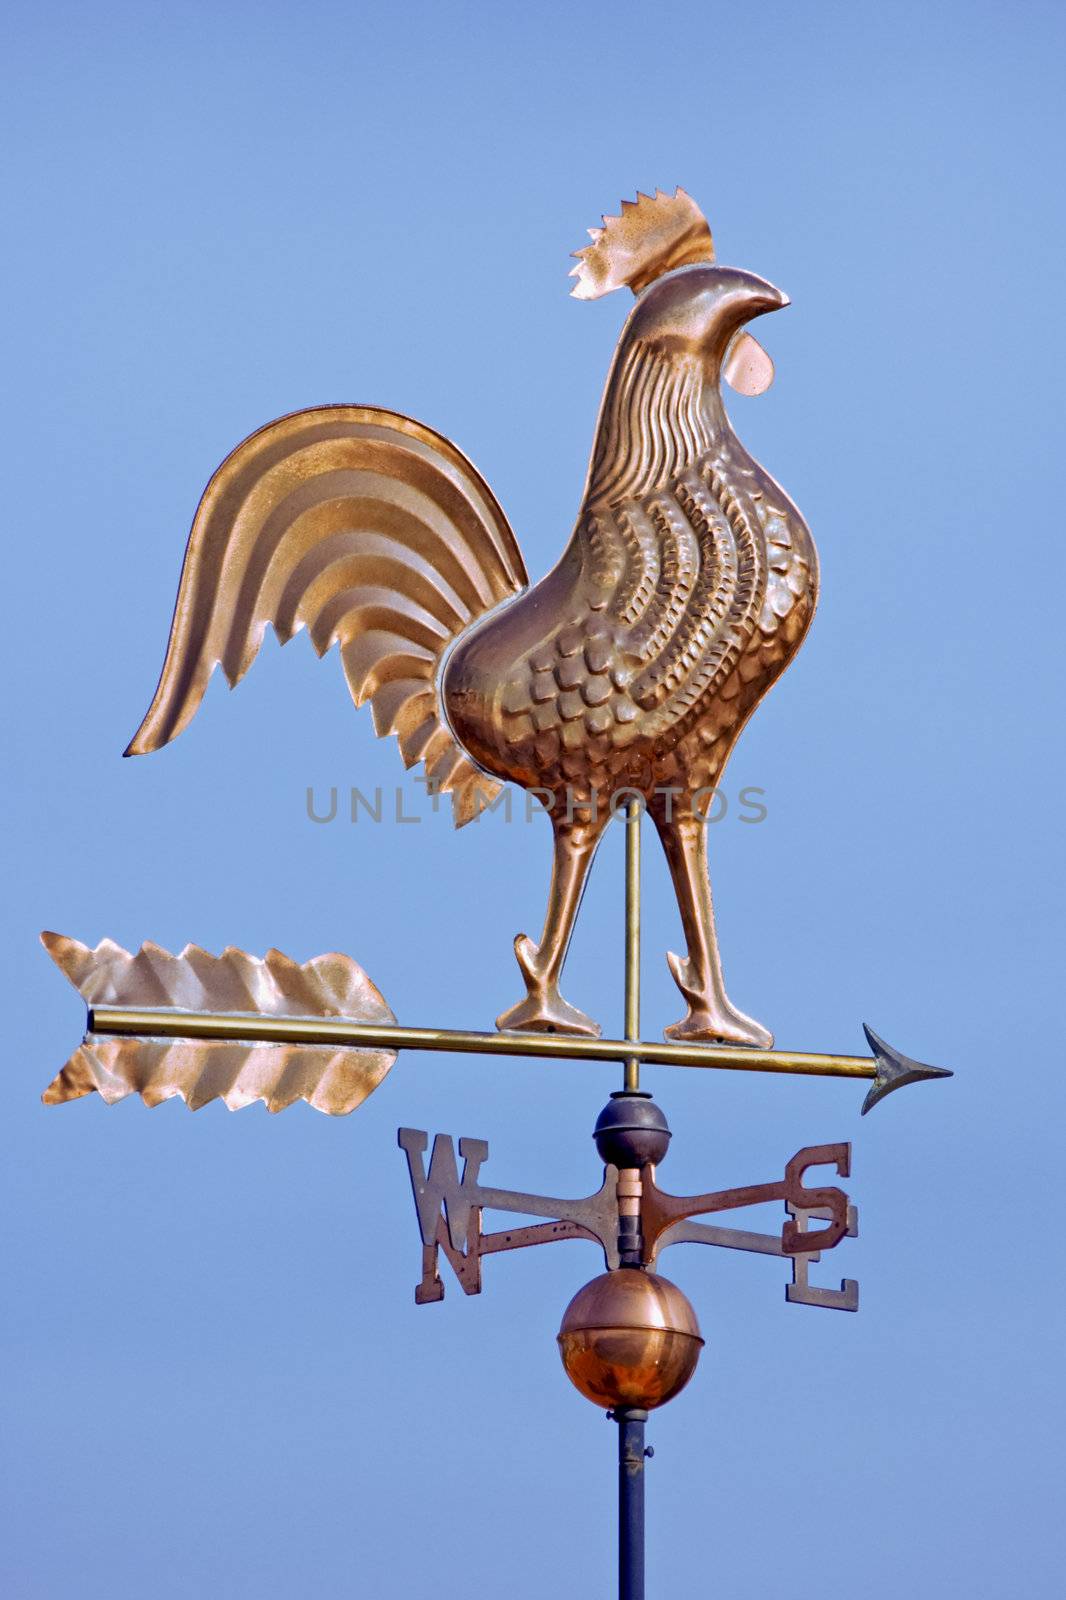 A weathercock indicates wind direction